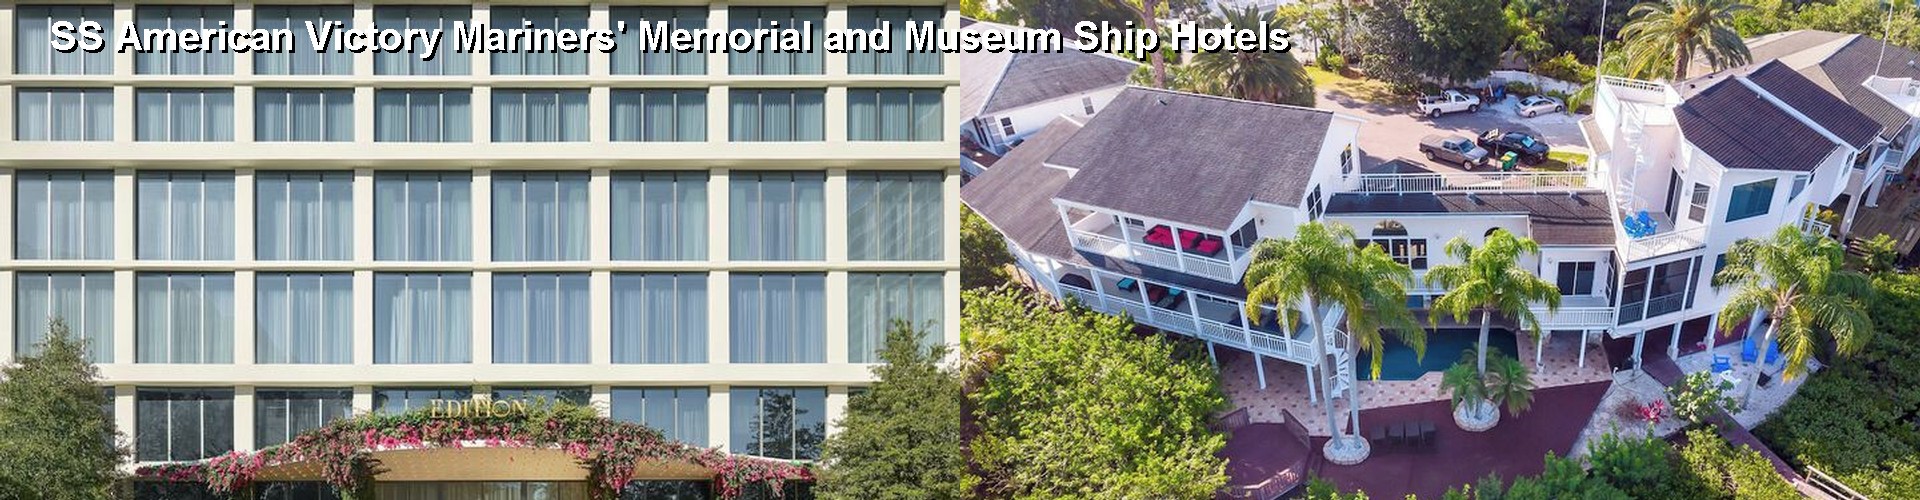 5 Best Hotels near SS American Victory Mariners' Memorial and Museum Ship